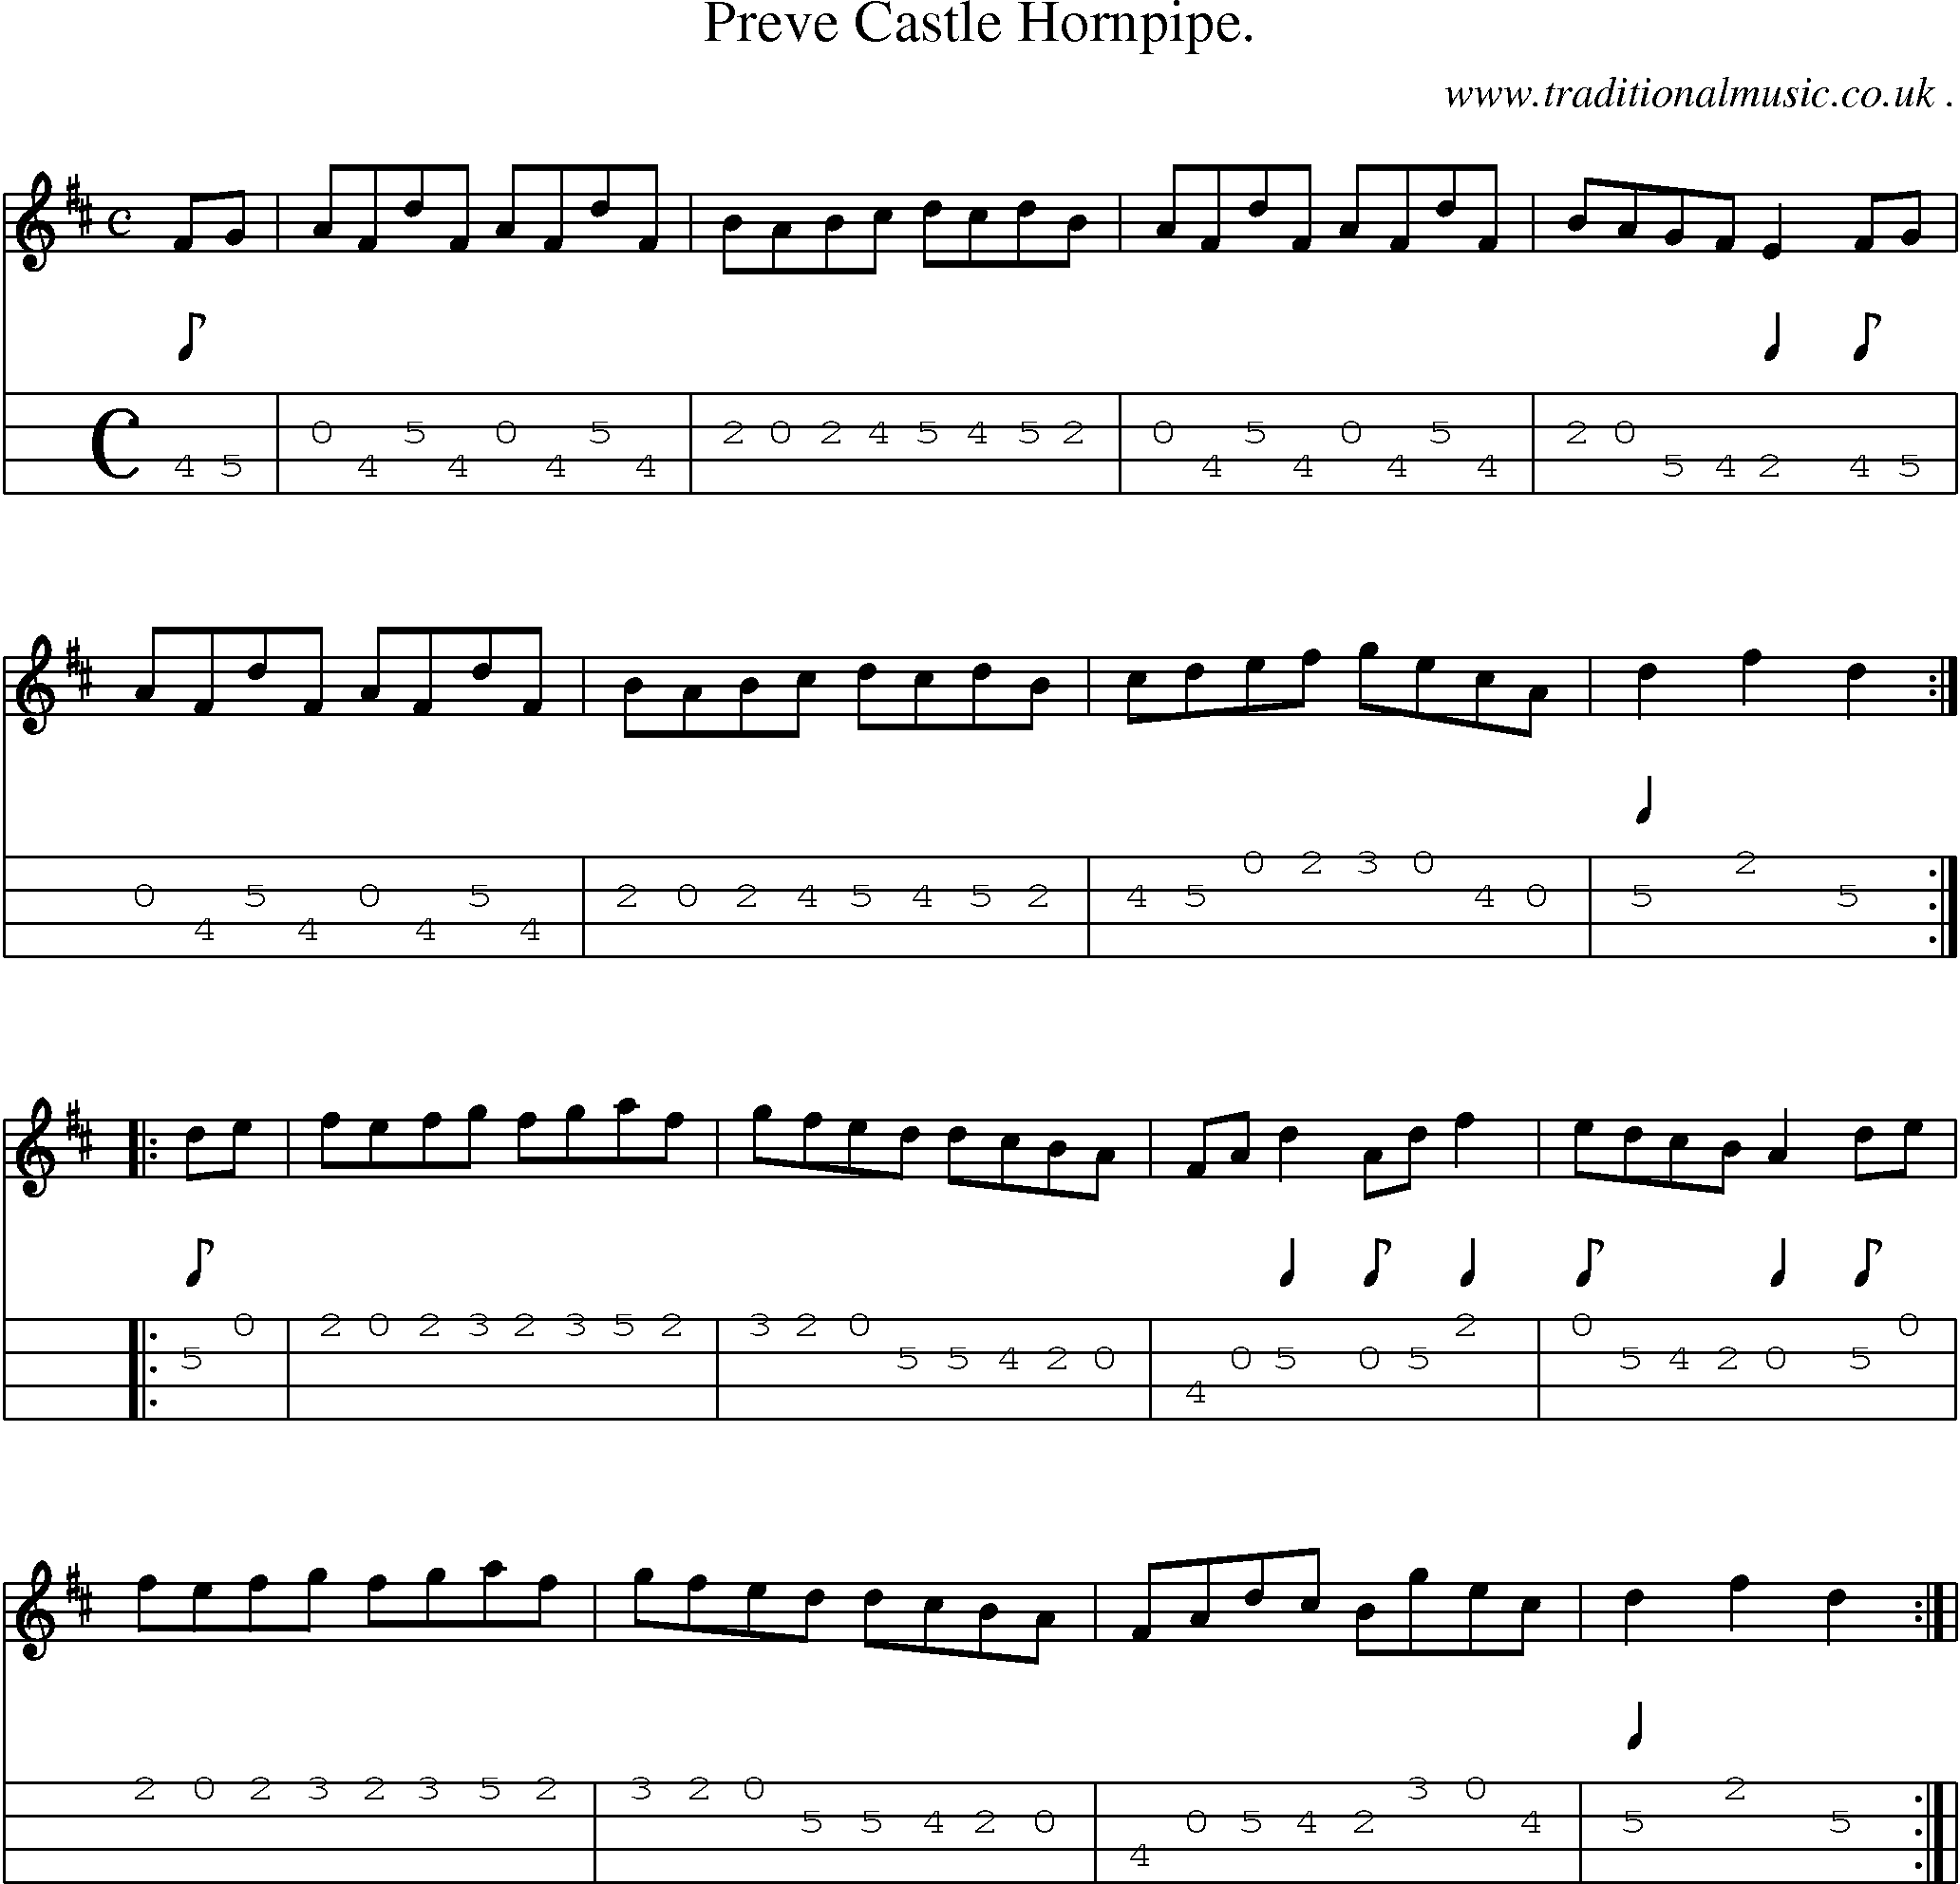 Sheet-Music and Mandolin Tabs for Preve Castle Hornpipe